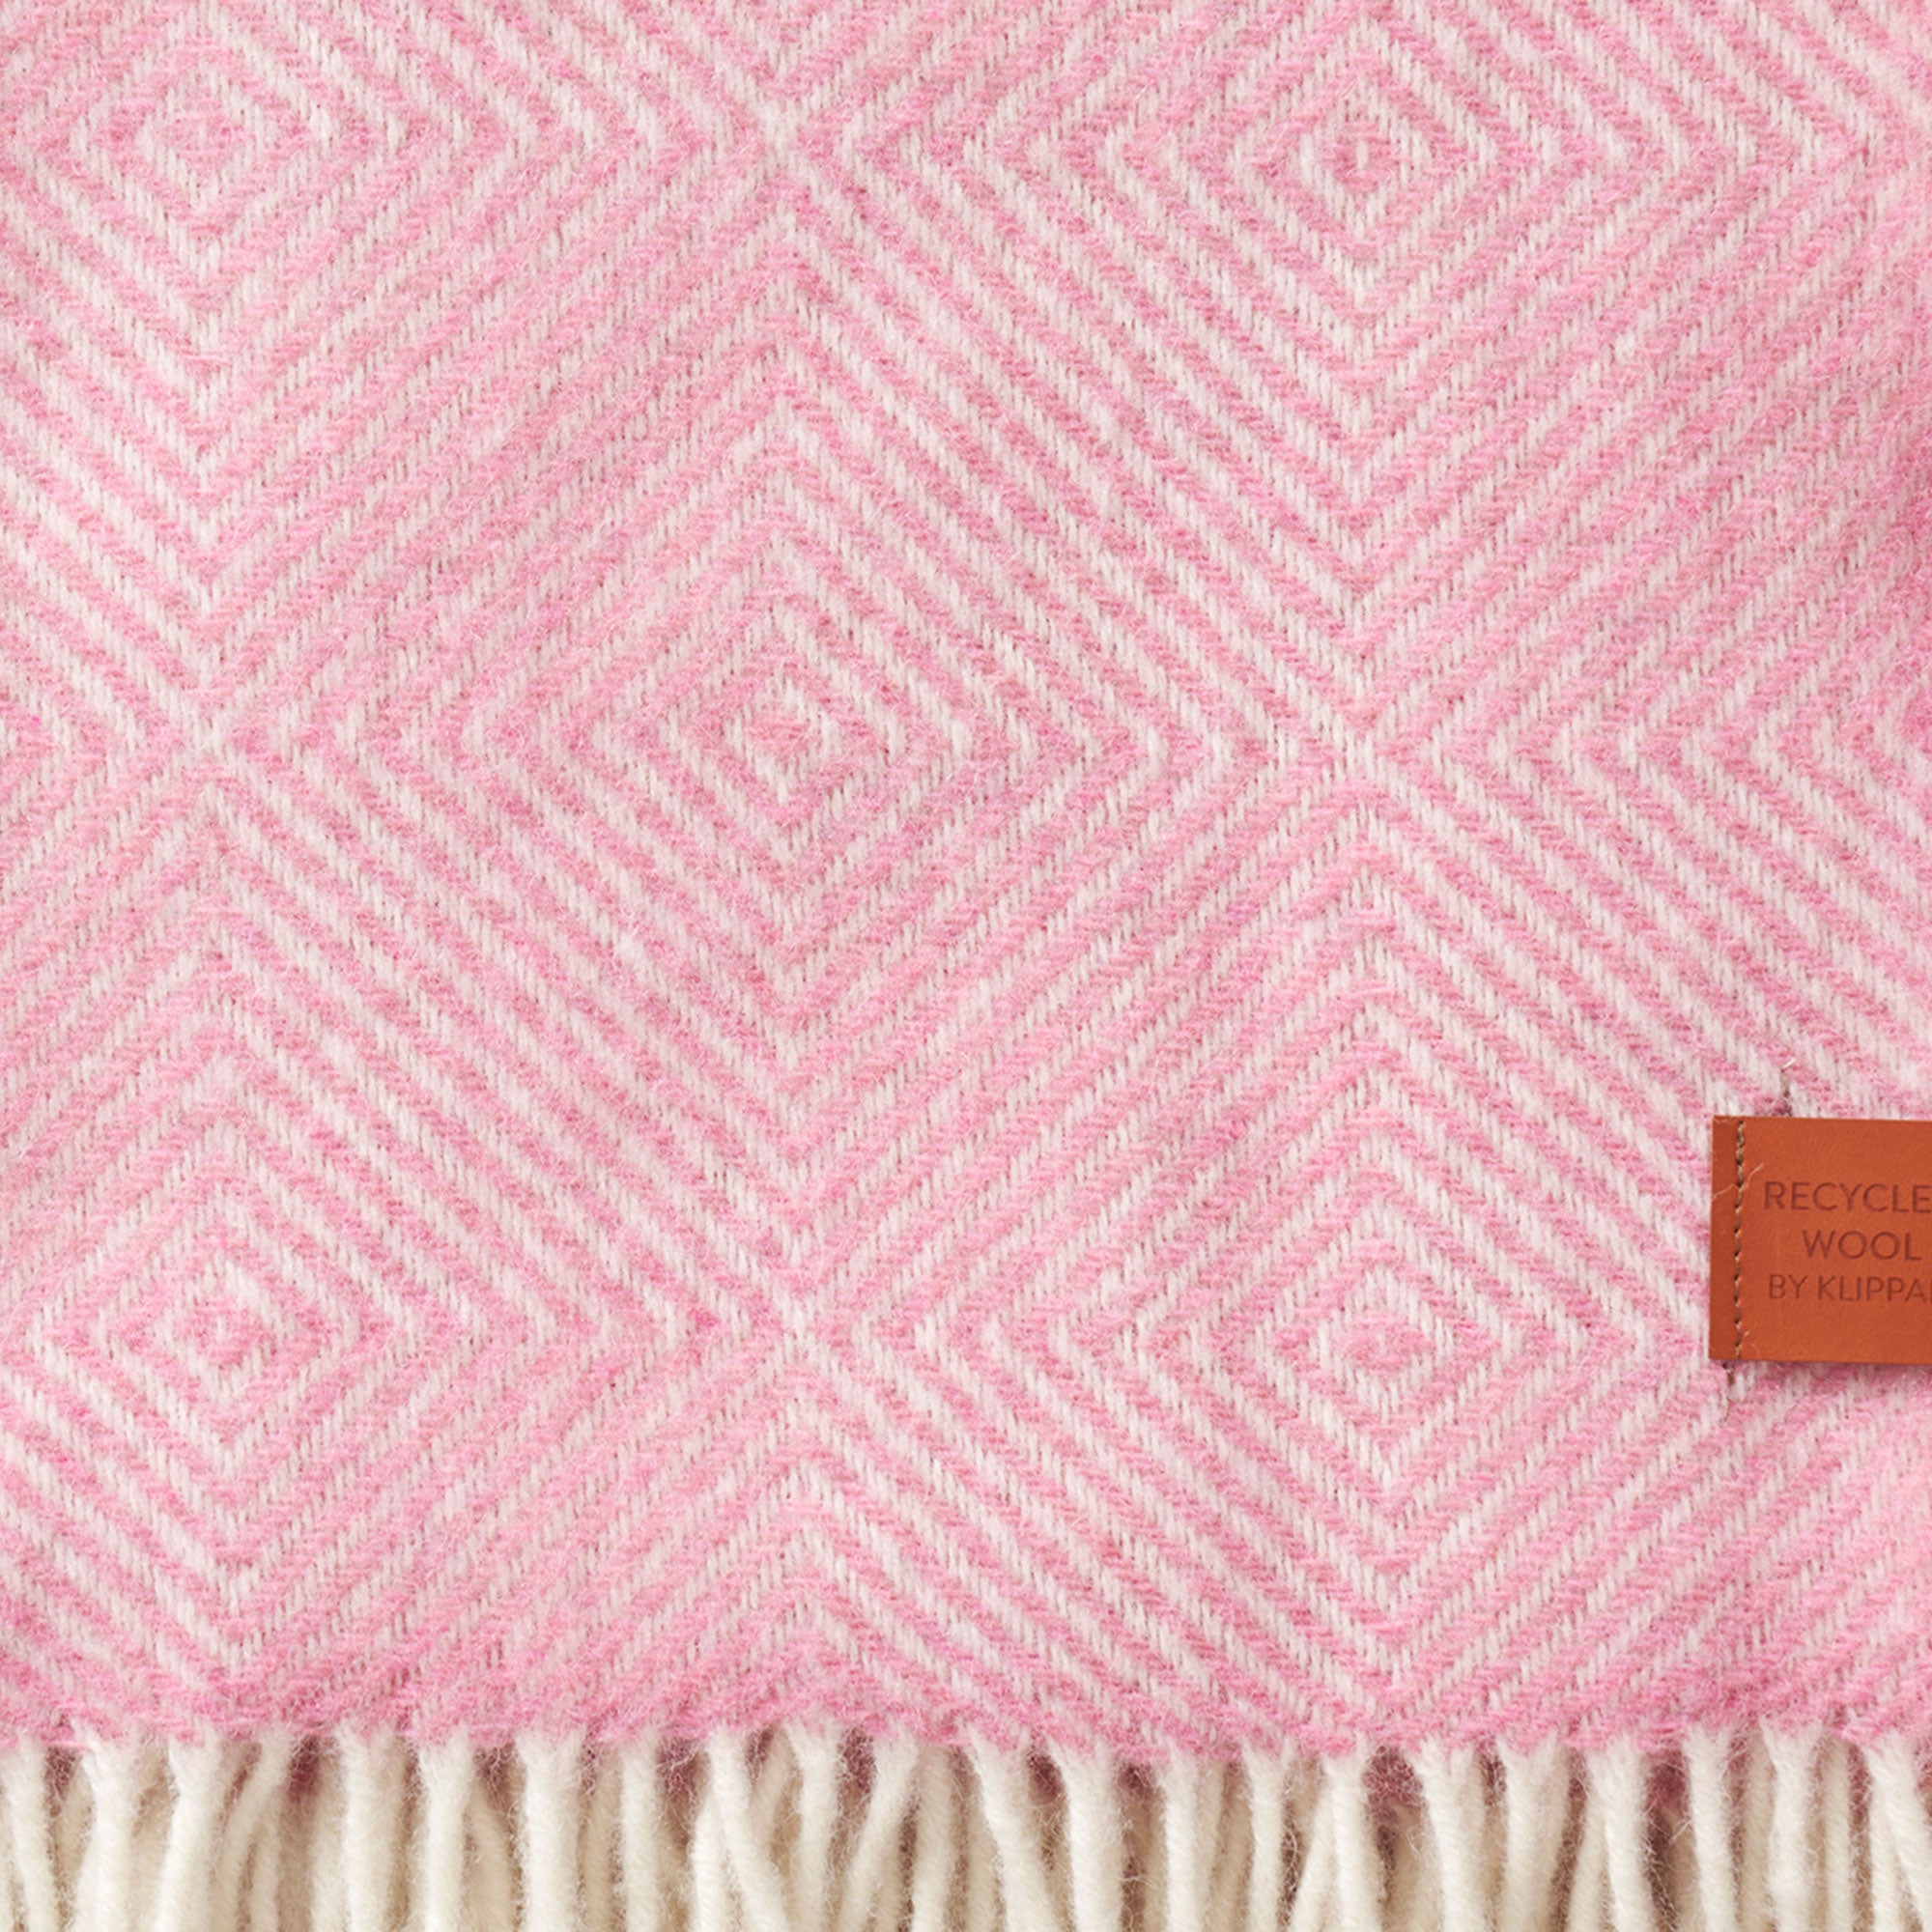 Gooseye Pink 130x200cm Recycled Wool Throw